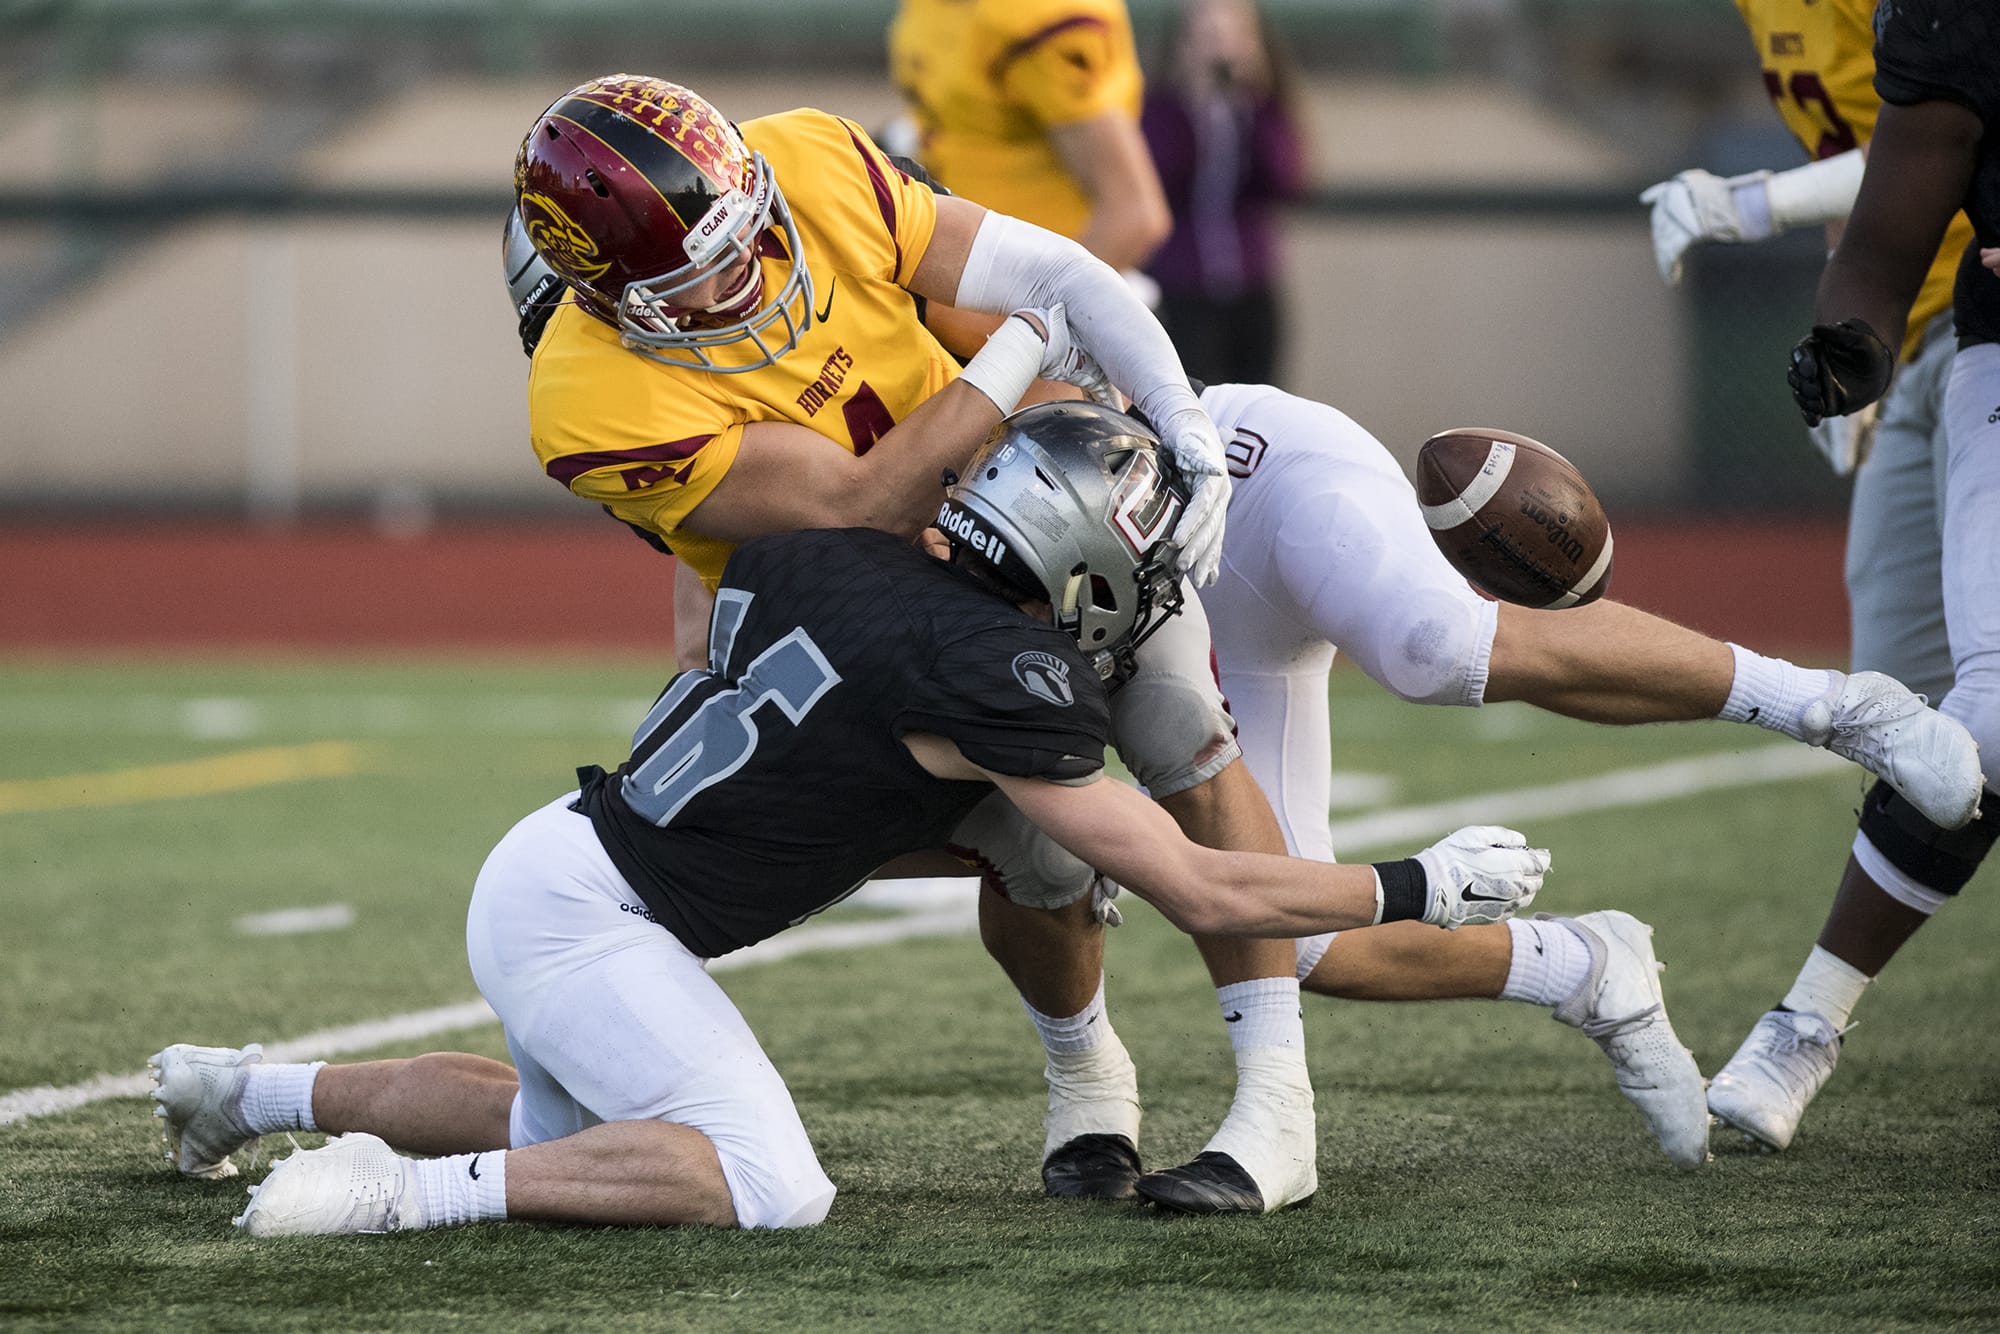 Union's Michael Rogers knocks the ball from the hands of Enumclaw's Ethan Eilertson to force a fumble during a match at McKenzie Stadium Friday night, Nov. 2, 2018.